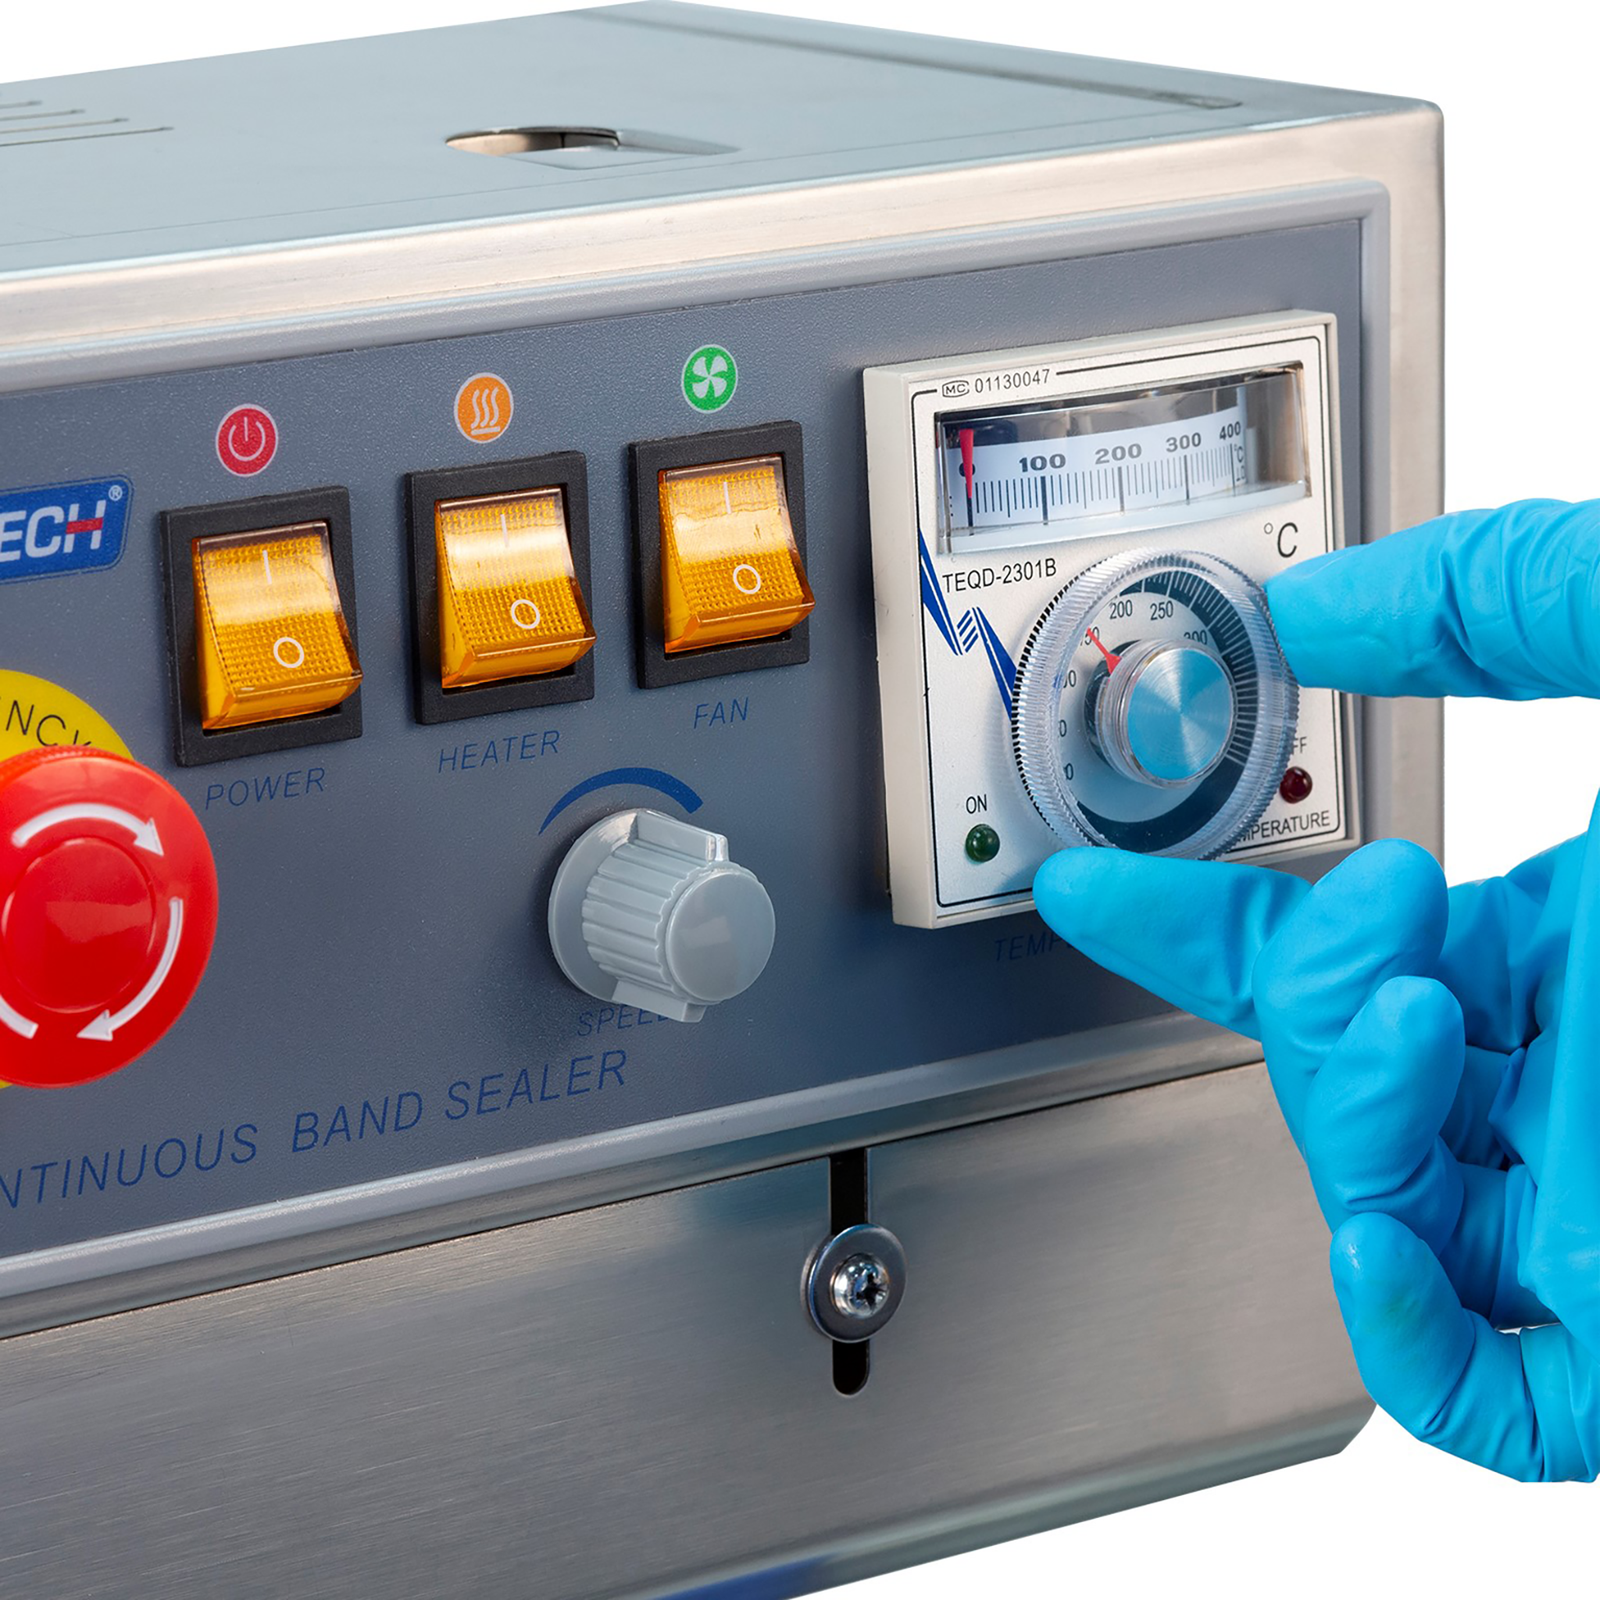 operator wearing blue gloves adjusting analog temperature control dial on the JORESTECH continuous band sealer